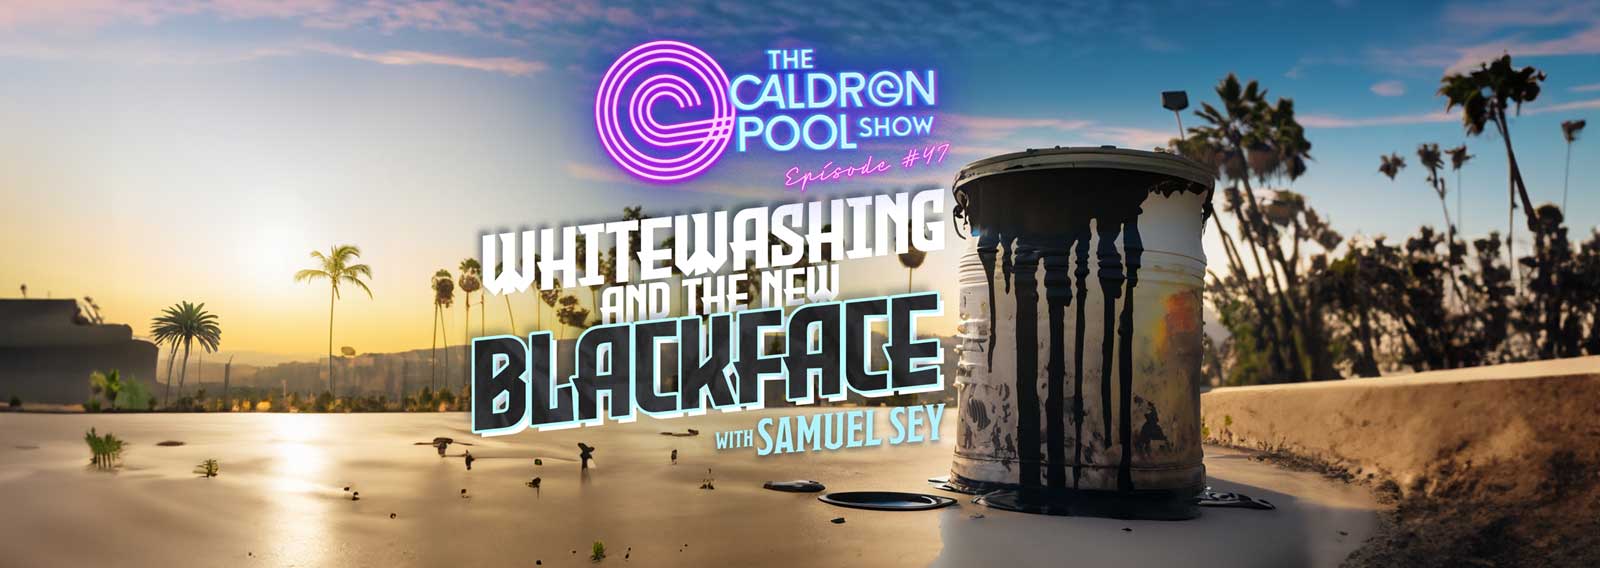 The Caldron Pool Show: #47 – Whitewashing and the New Blackface